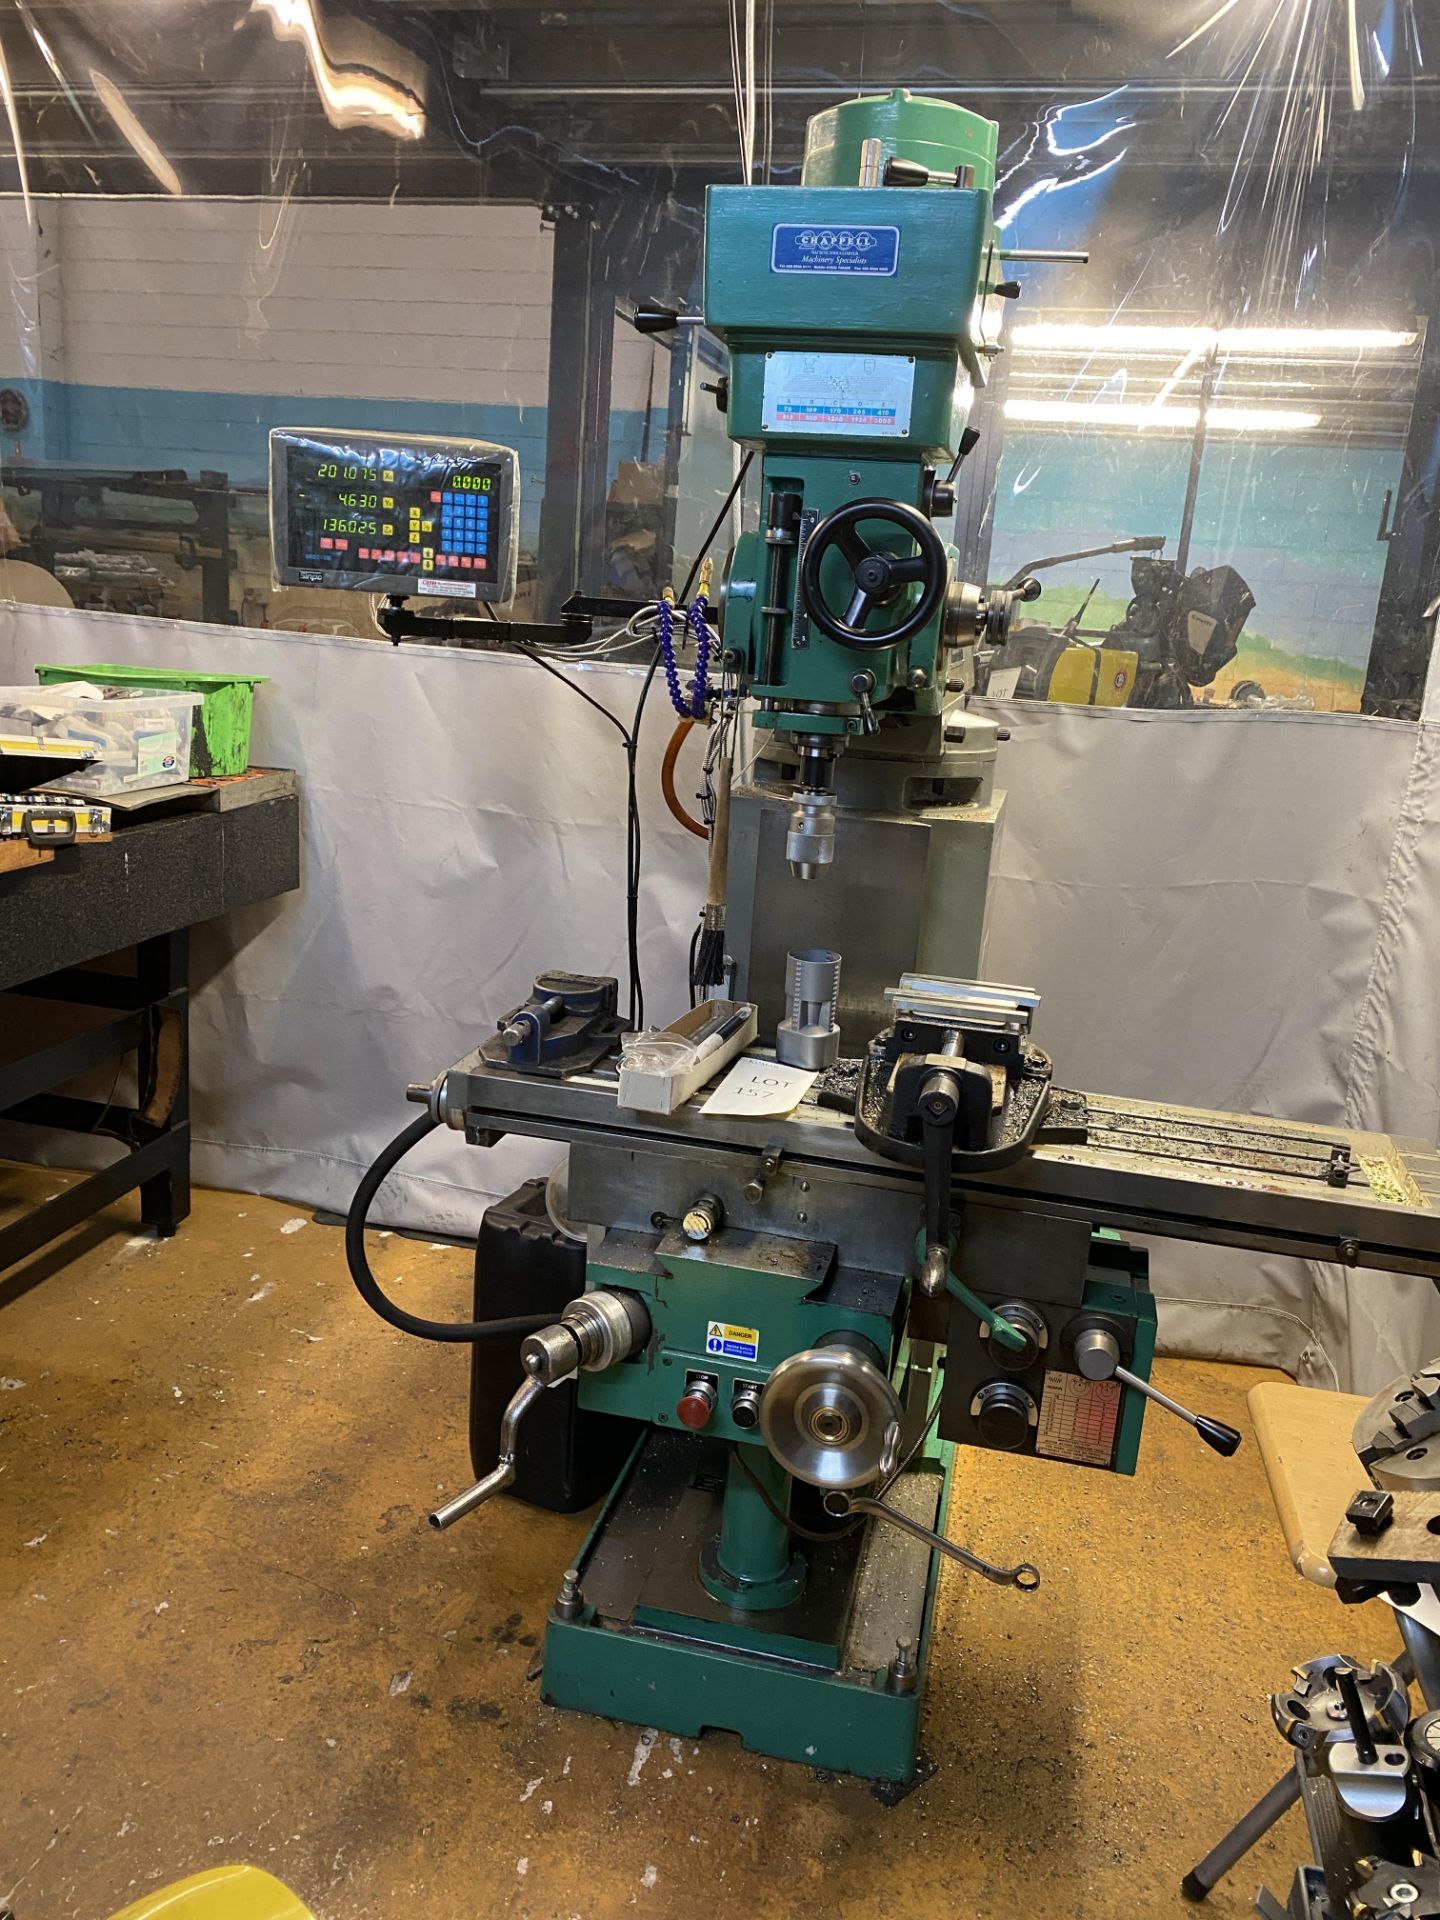 Elliott Milmor 10 Turret Milling Machine Serial No: 015807-119, complete with Sinpo - 3 Axis Dro - Image 2 of 17